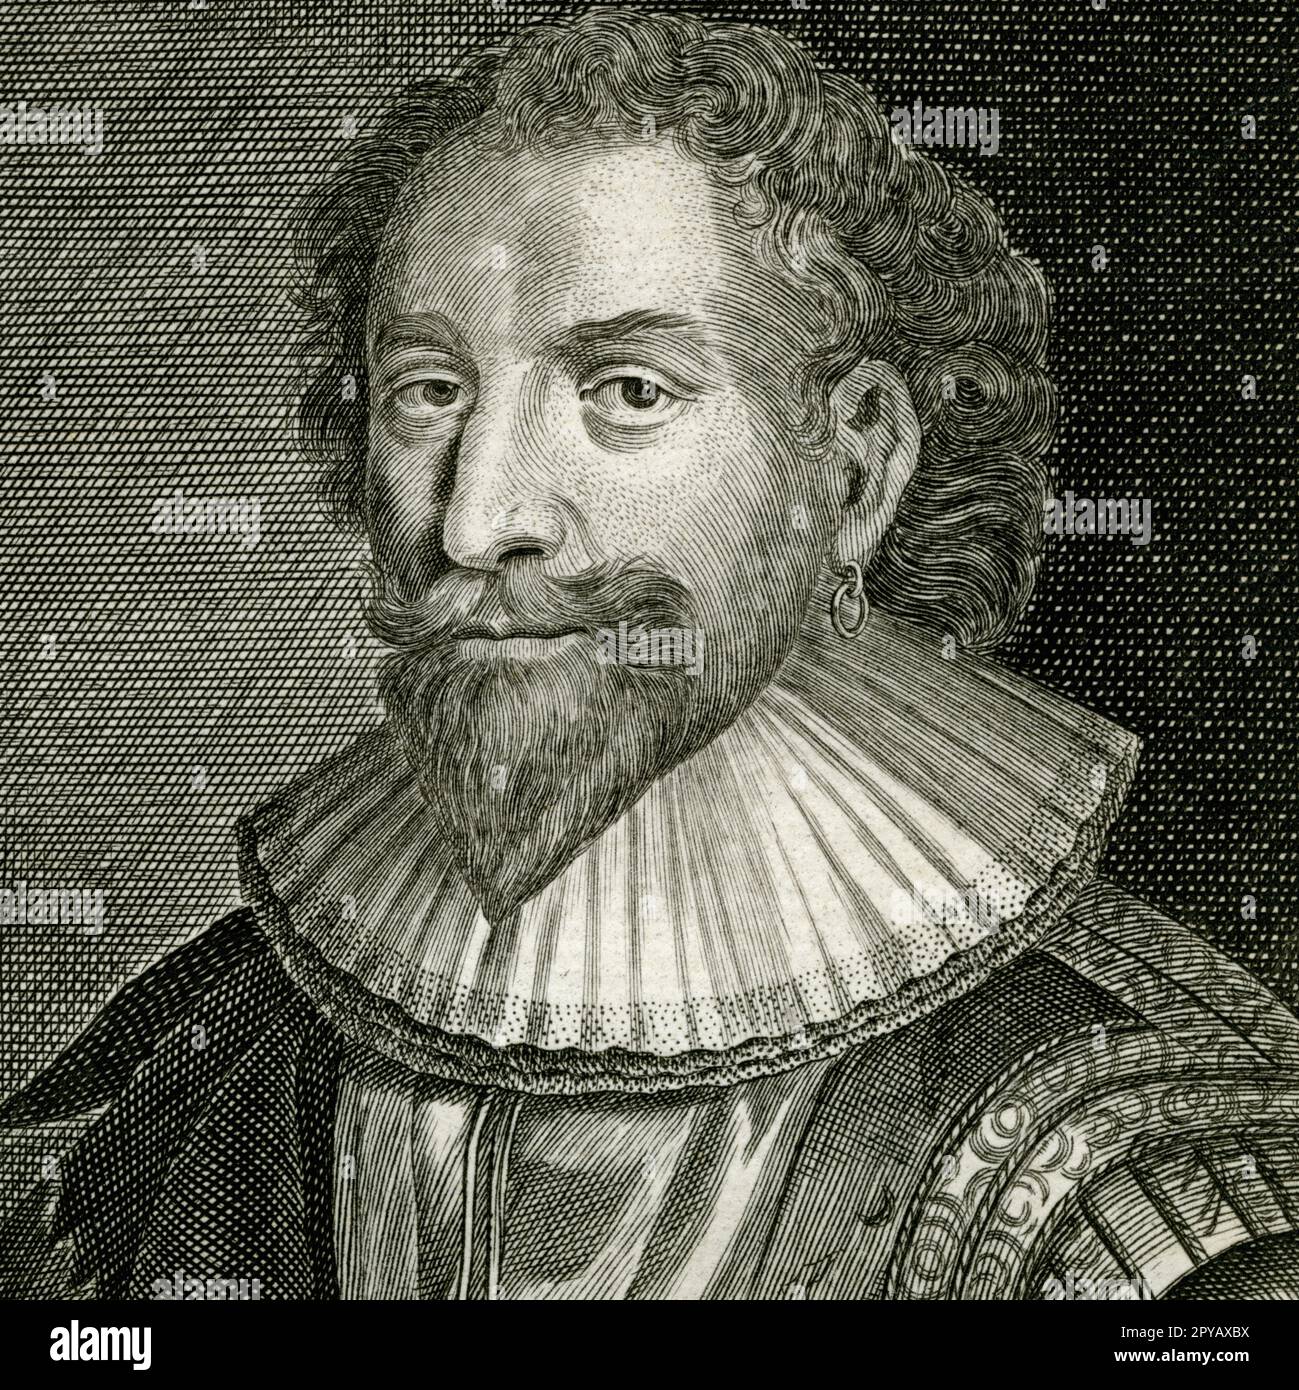 William Herbert, 3rd Earl of Pembroke (1580-1630), founder of Pembroke College, Oxford, and patron of the arts. Square detail of engraving created in the 1700s by George Vertue (1683-1756), after a portrait by Daniel Mytens (1590-1647), which was in turn based on a painting by Sir Anthony van Dyck (1599-1641) Stock Photo